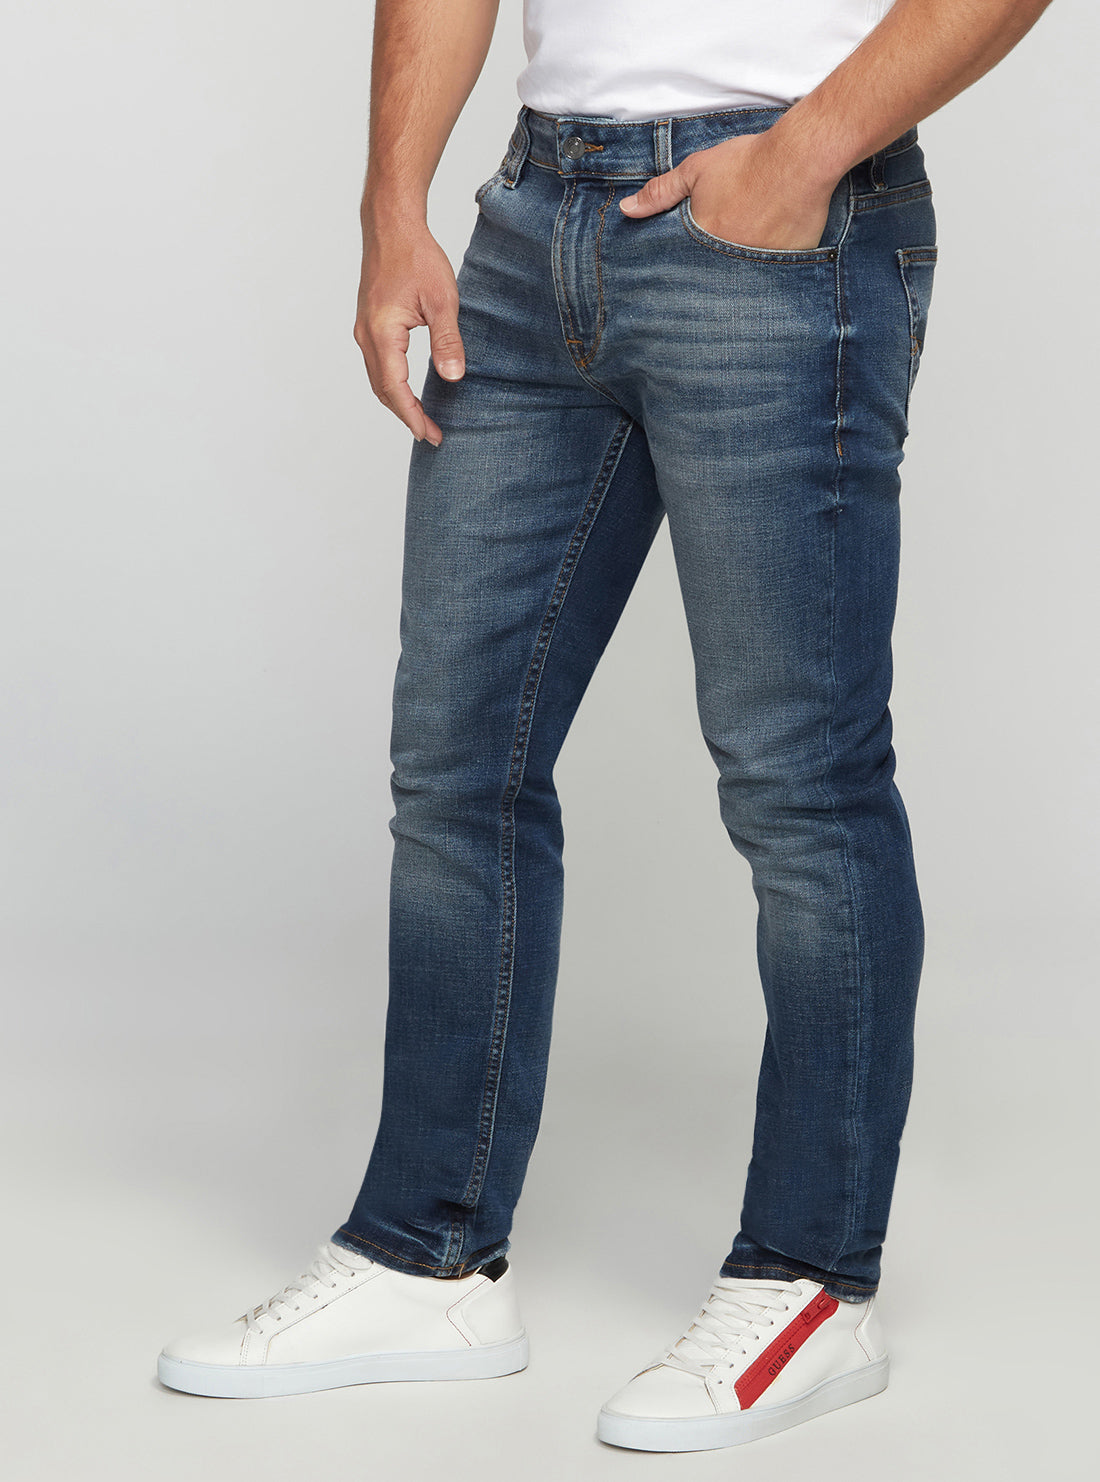 GUESS Men's Eco Low-Rise Slim Tapered Denim Jeans In Stratus Blue Wash MBGAS230411 Side View